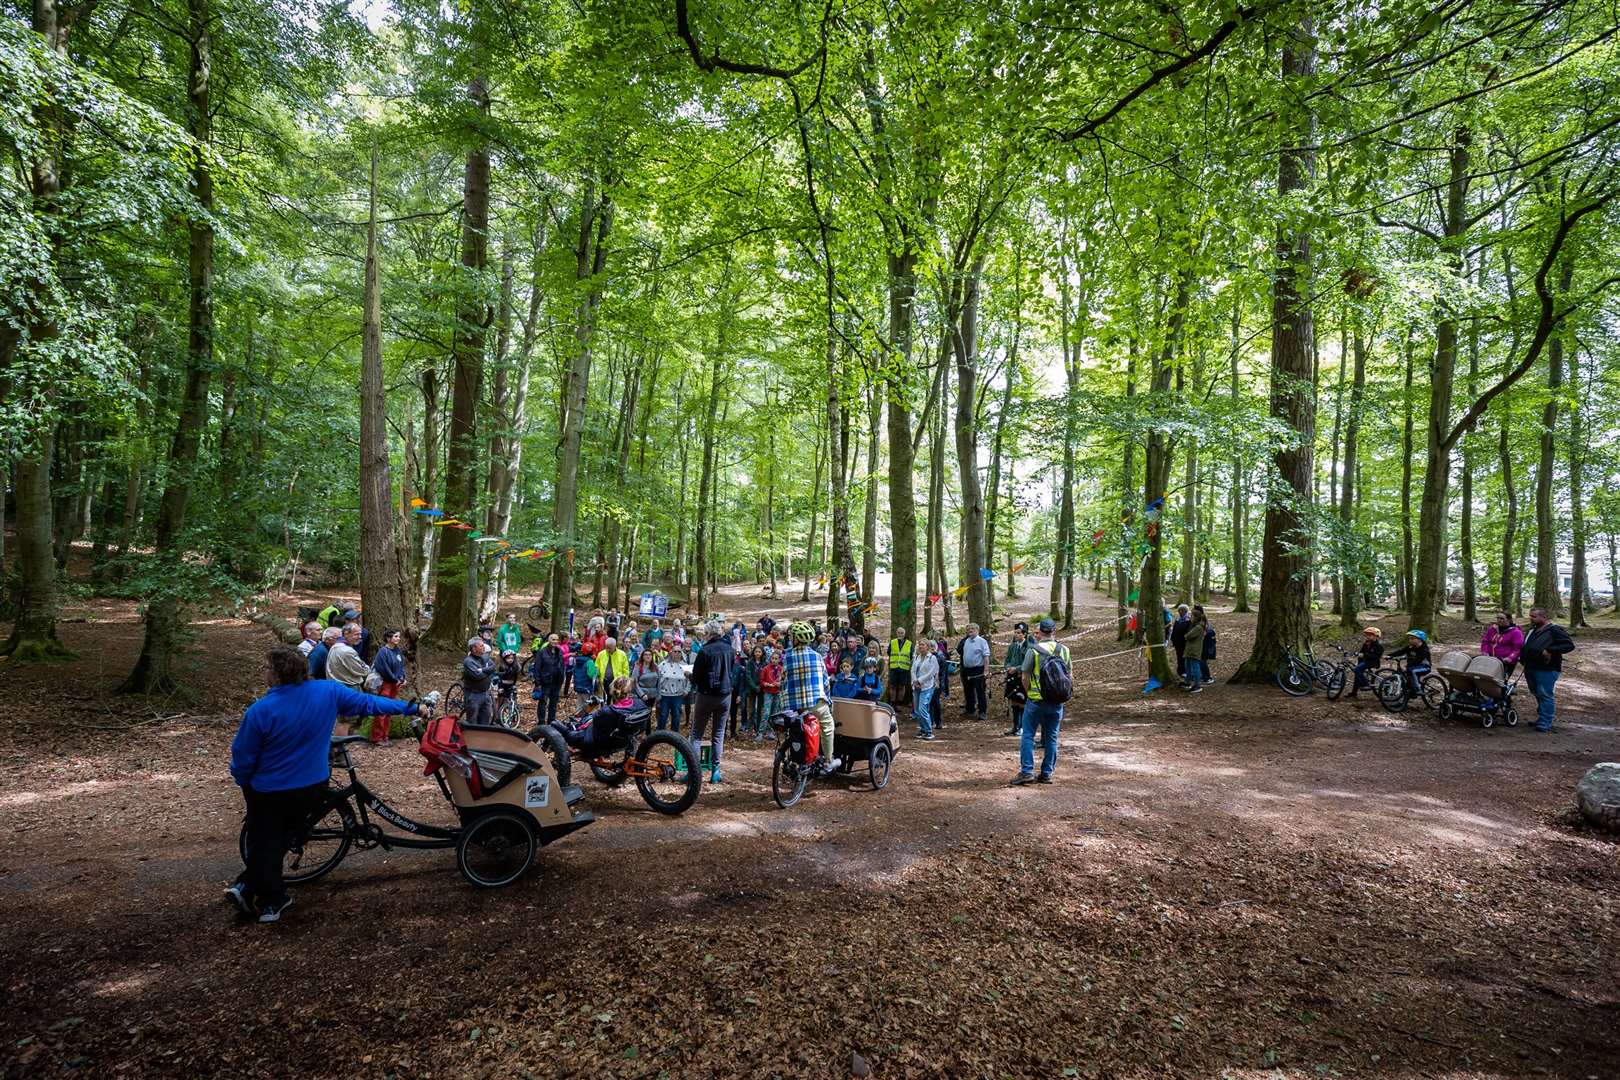 Culduthel Woods Group in Inverness, a local charity, hosted their first woodland gathering as part of the Highland Climate Festival, to mark its ownership success.